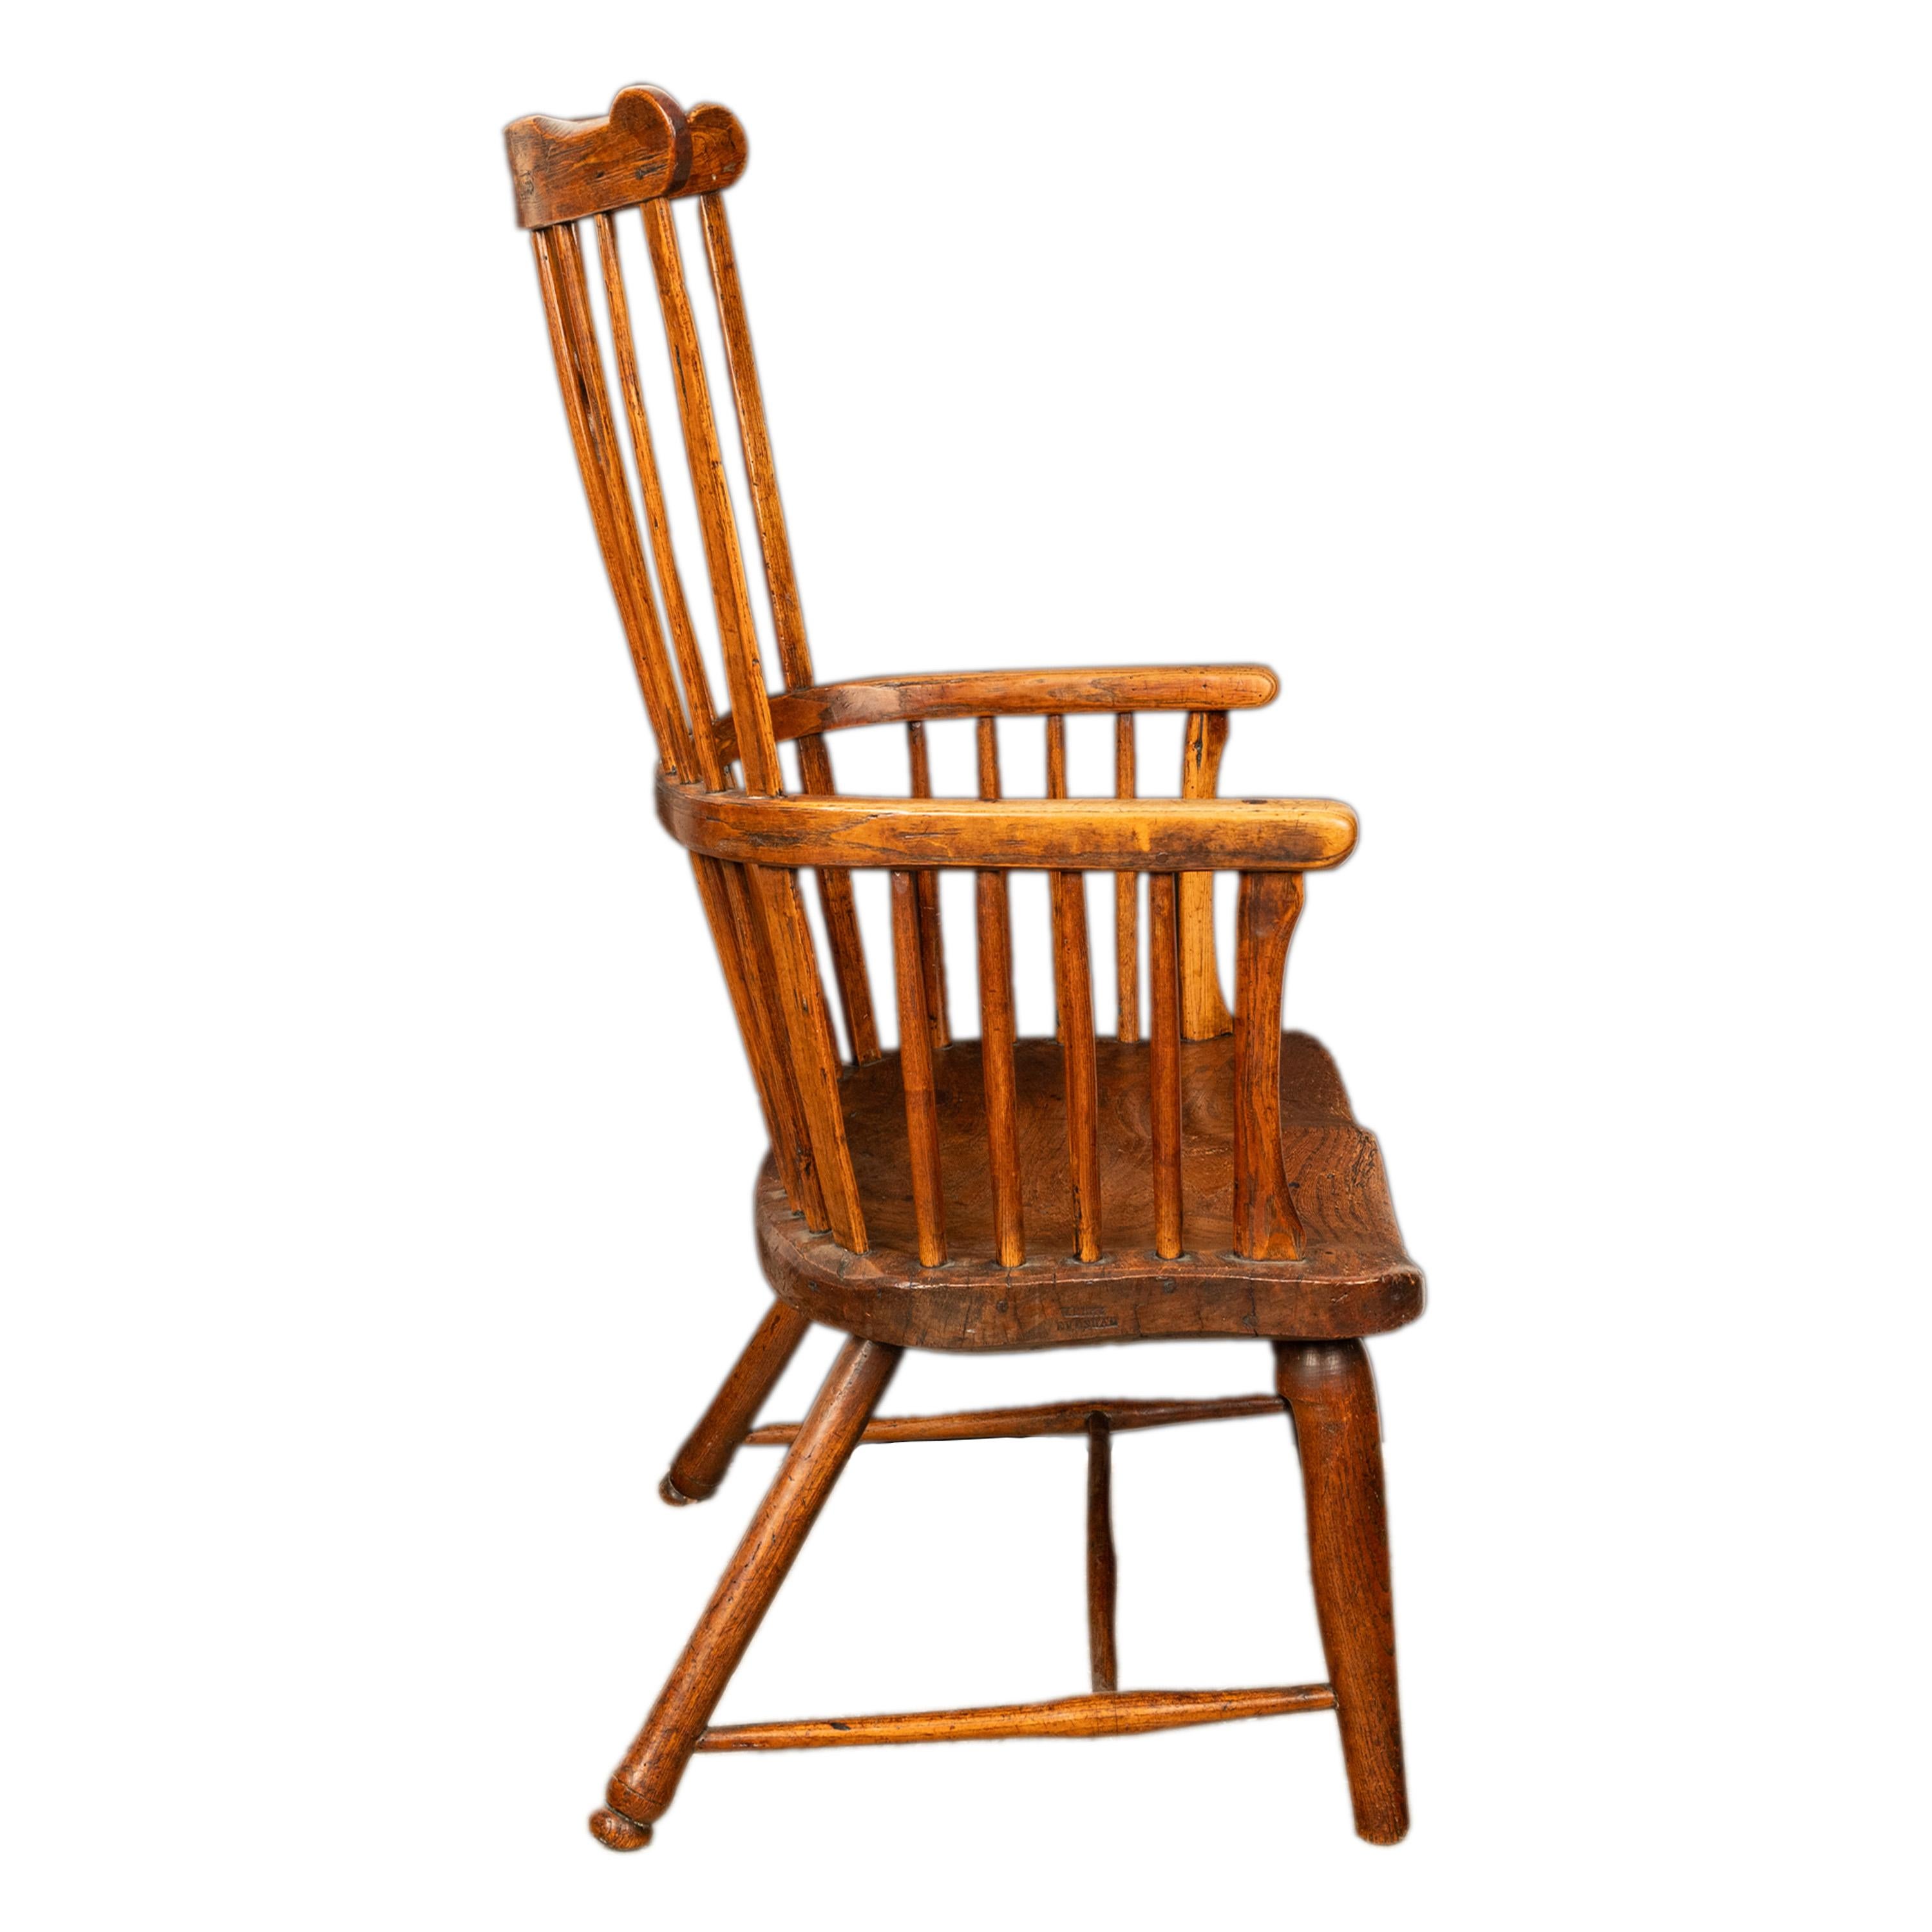 Important Antique Earliest Recorded English Windsor Chair by Kerry Evesham 1793 For Sale 1